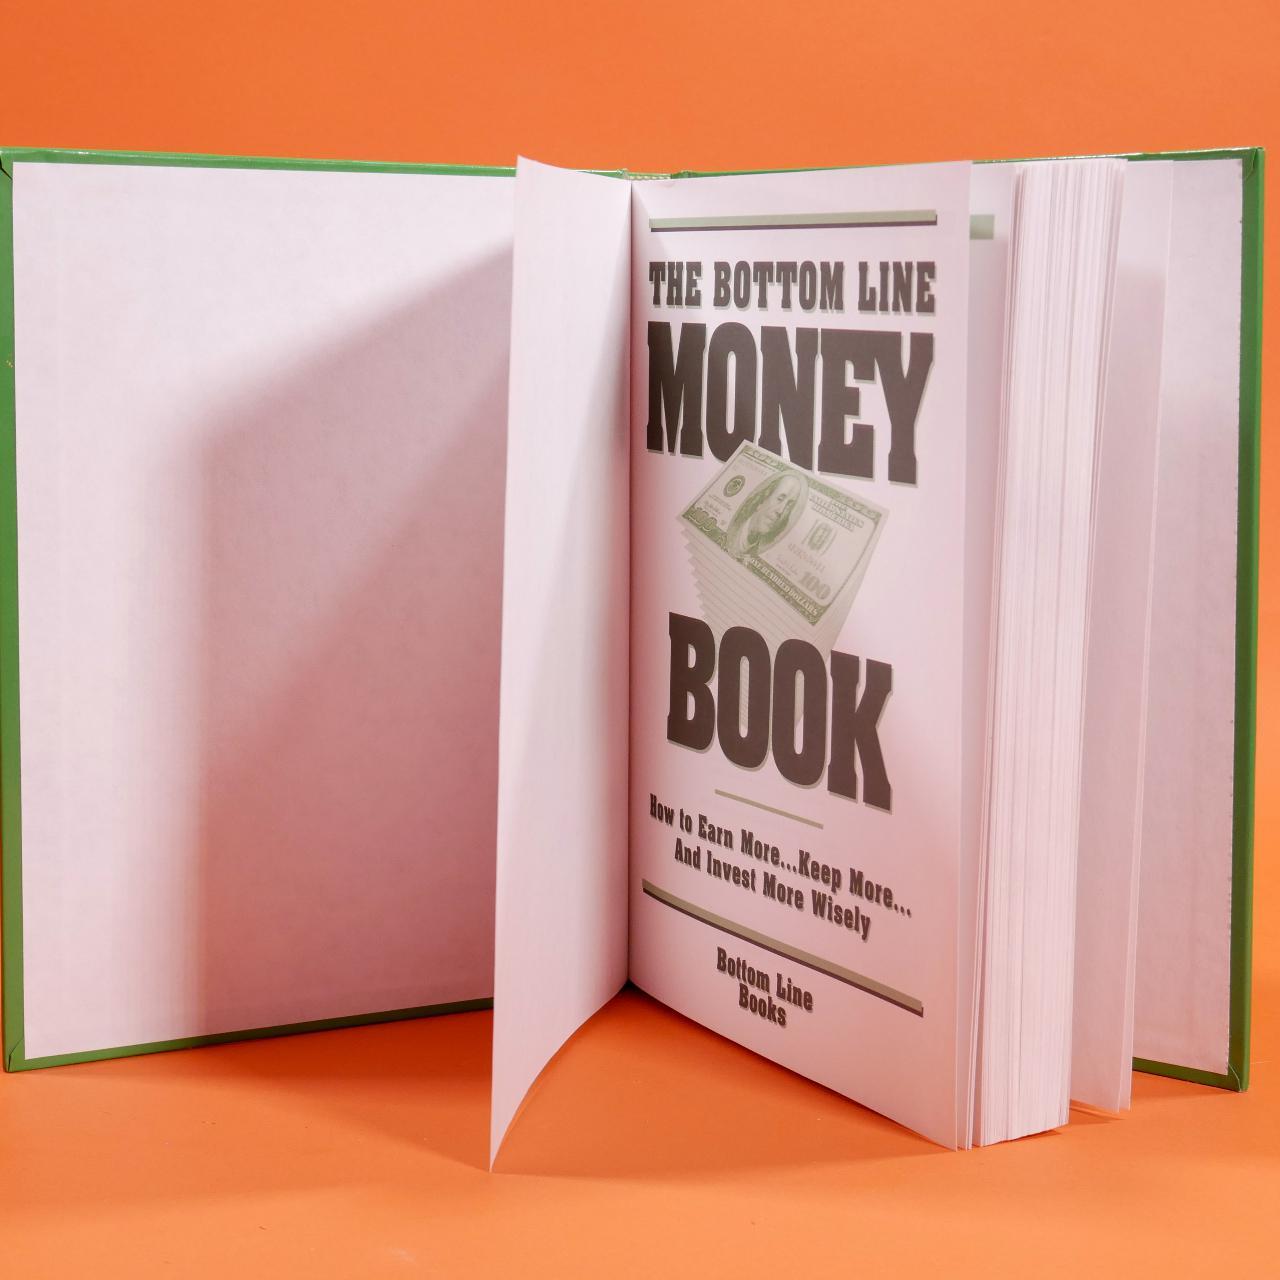 Product Image 2 - The Money Book

Your encyclopedia on